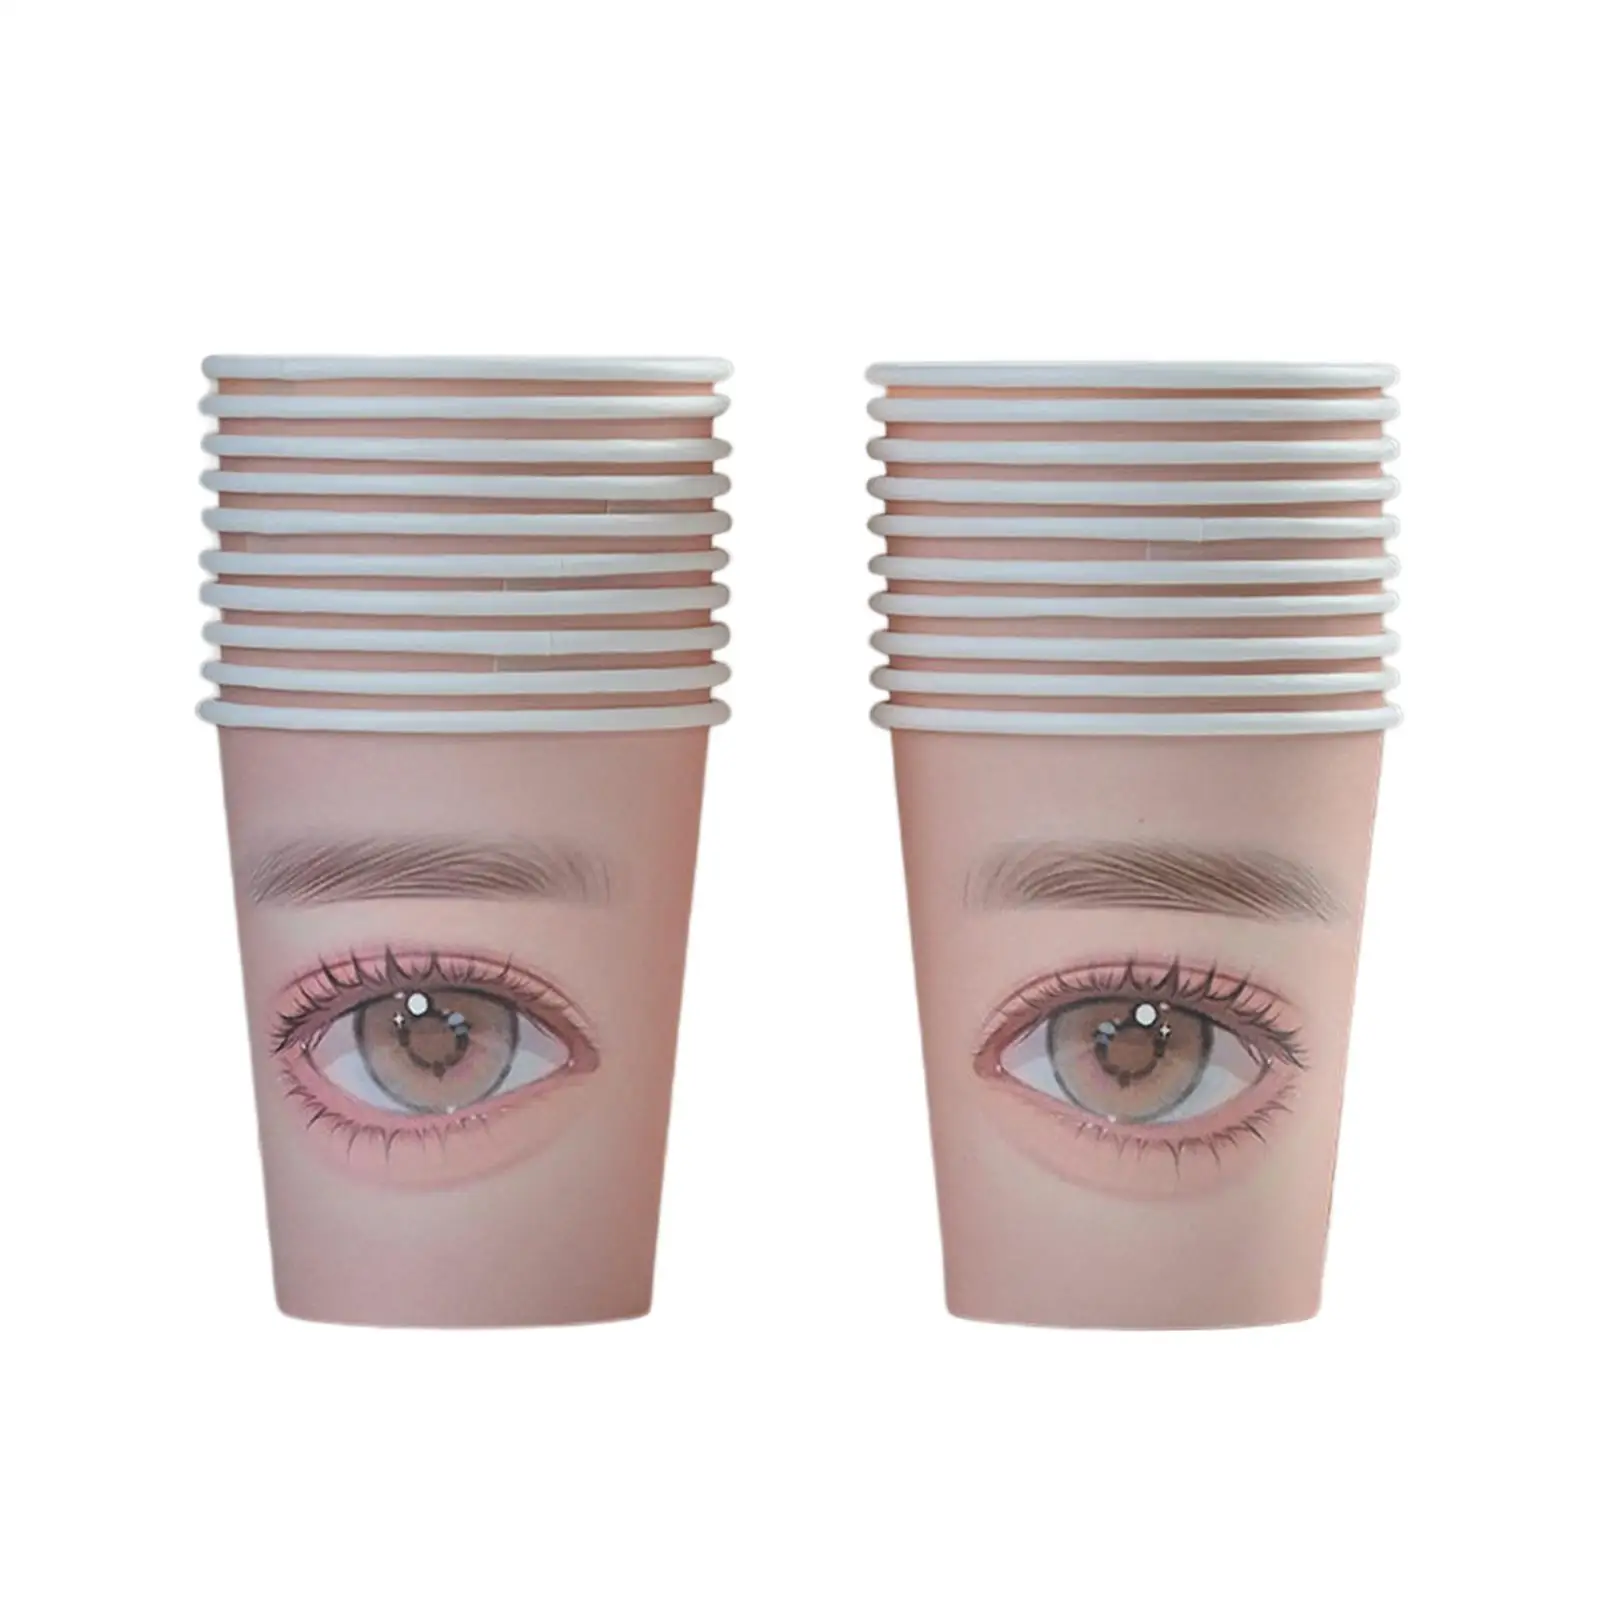 20 Pieces Eyelash Practice Paper Cup Lash Extension Supplies Mannequin Exercises Professional Makeup for Starters Auxiliary Tool